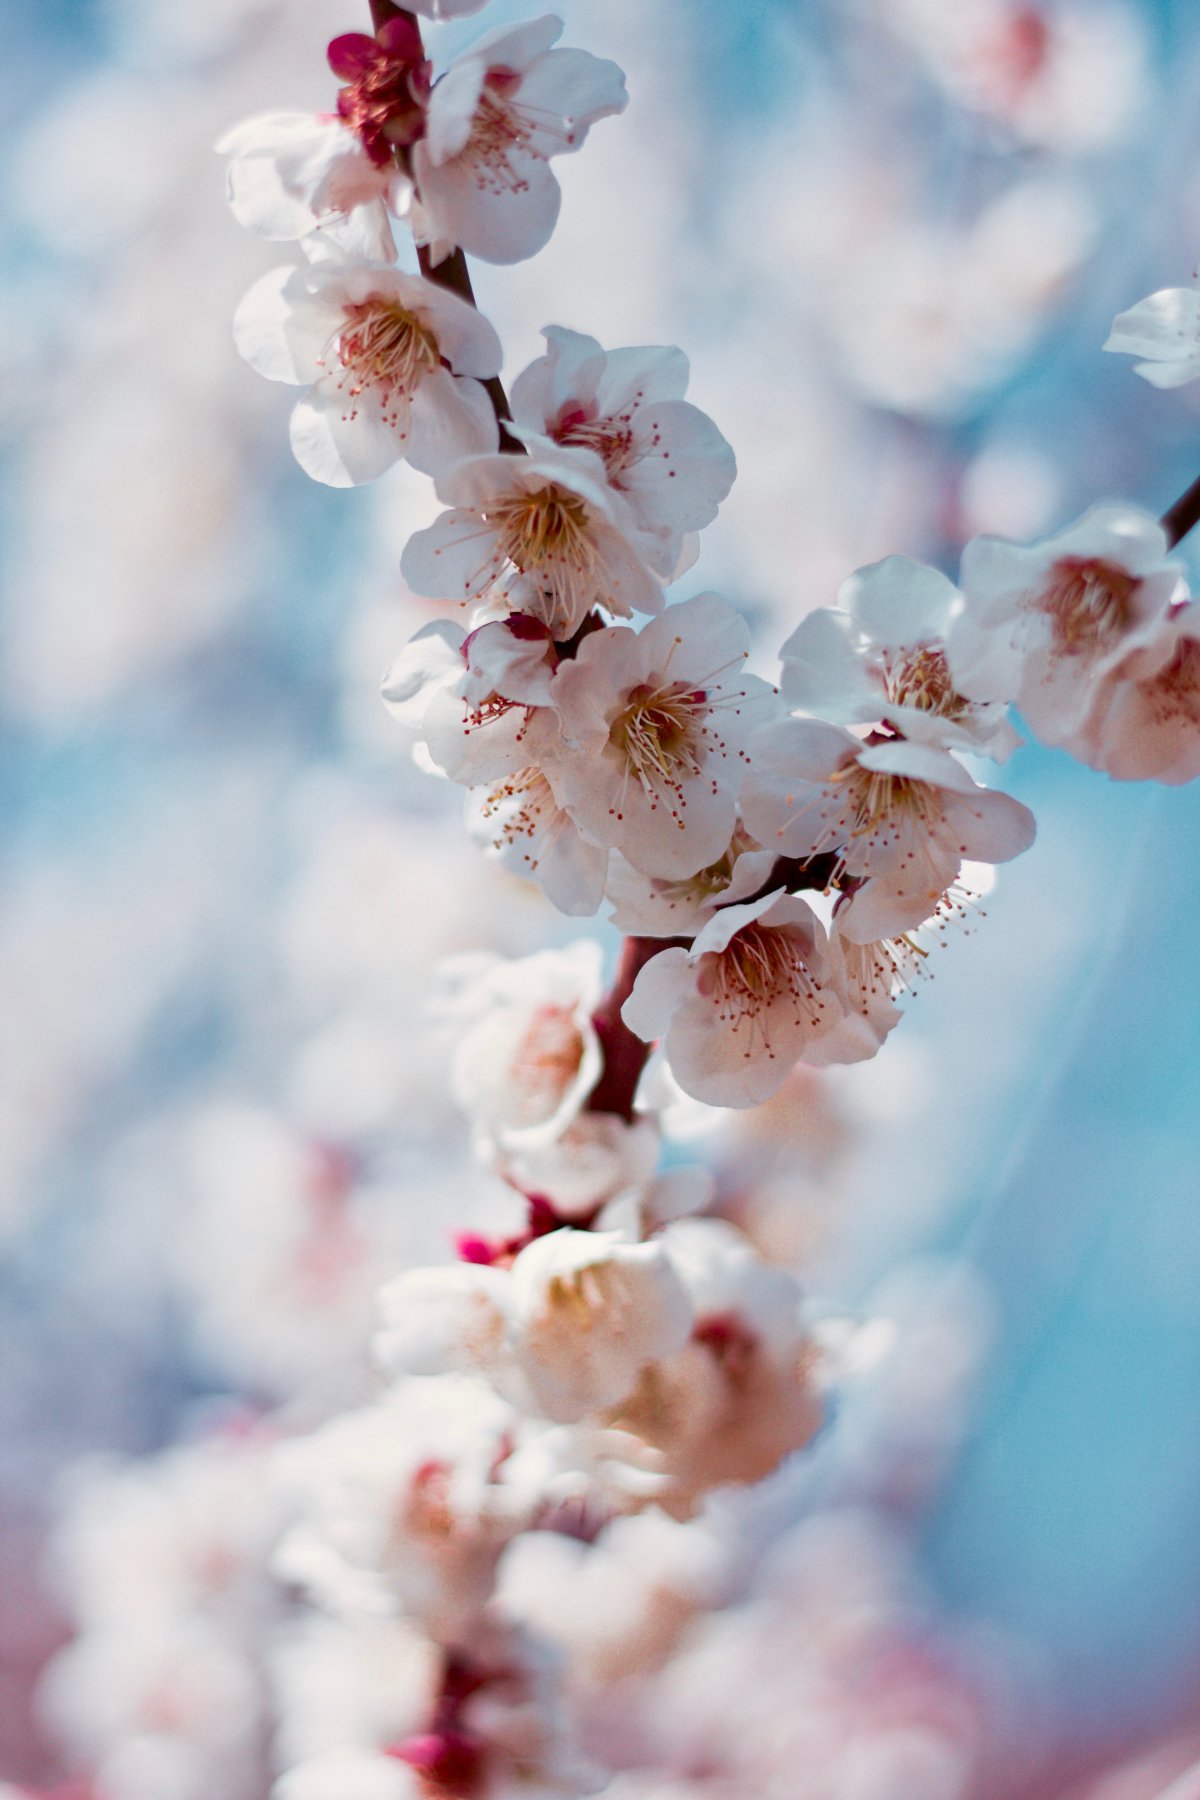 Pictures of gorgeous white cherry blossoms in full bloom